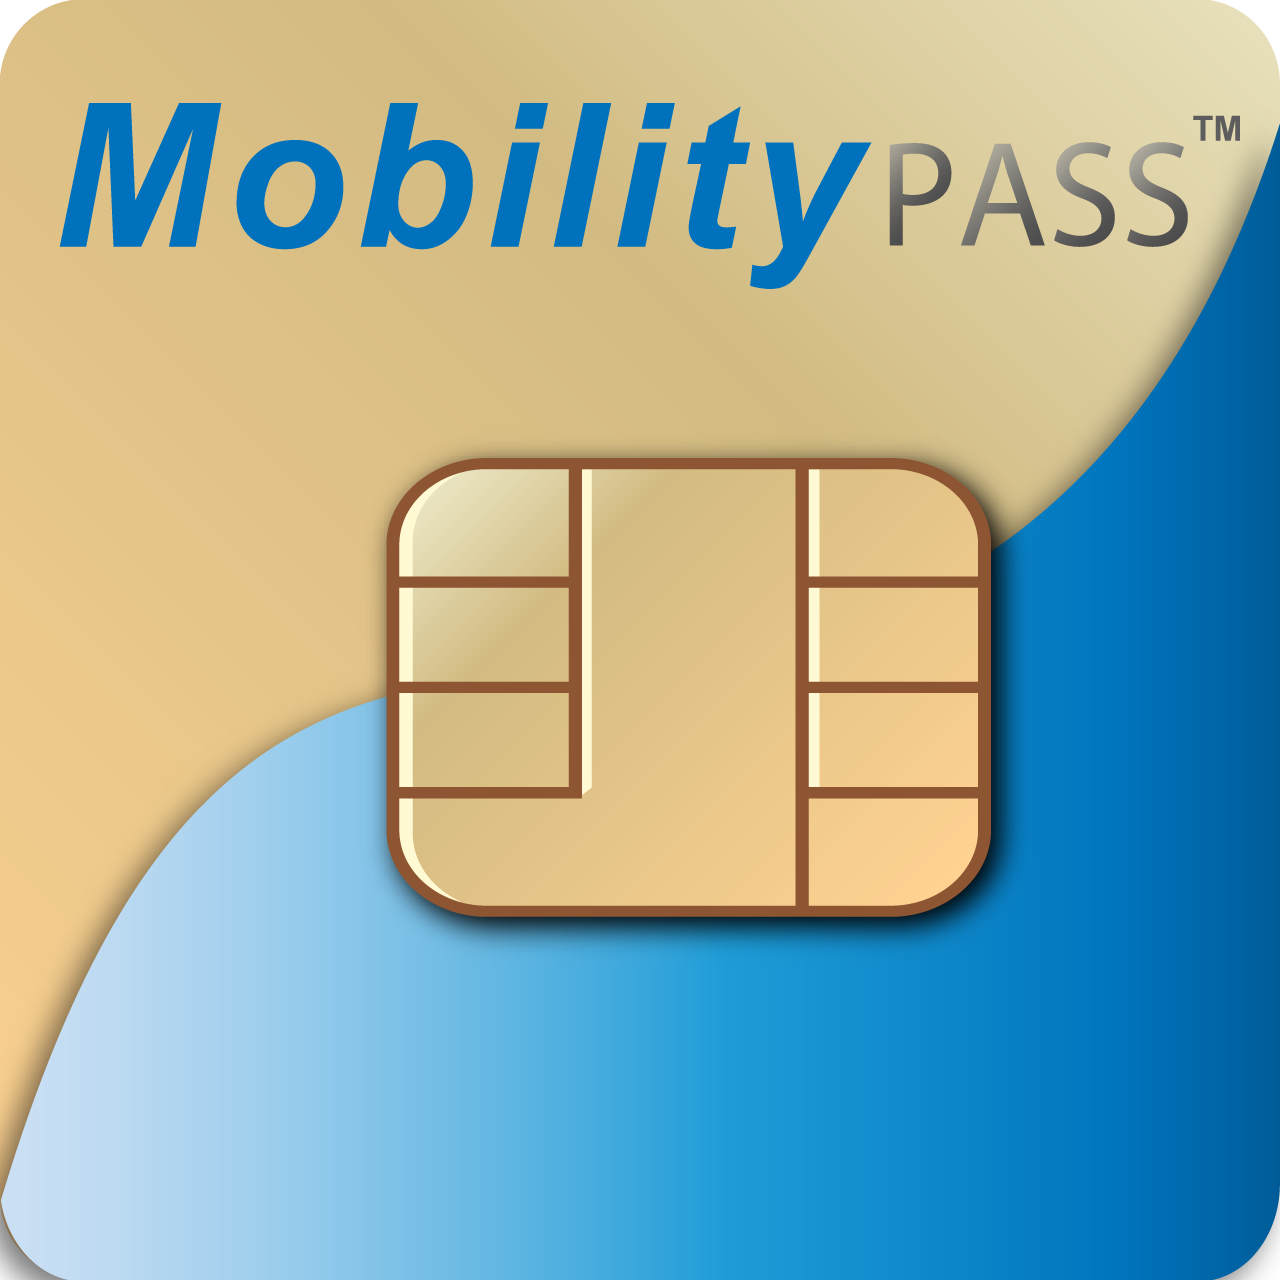 MobilityPass Multi-Networks official web